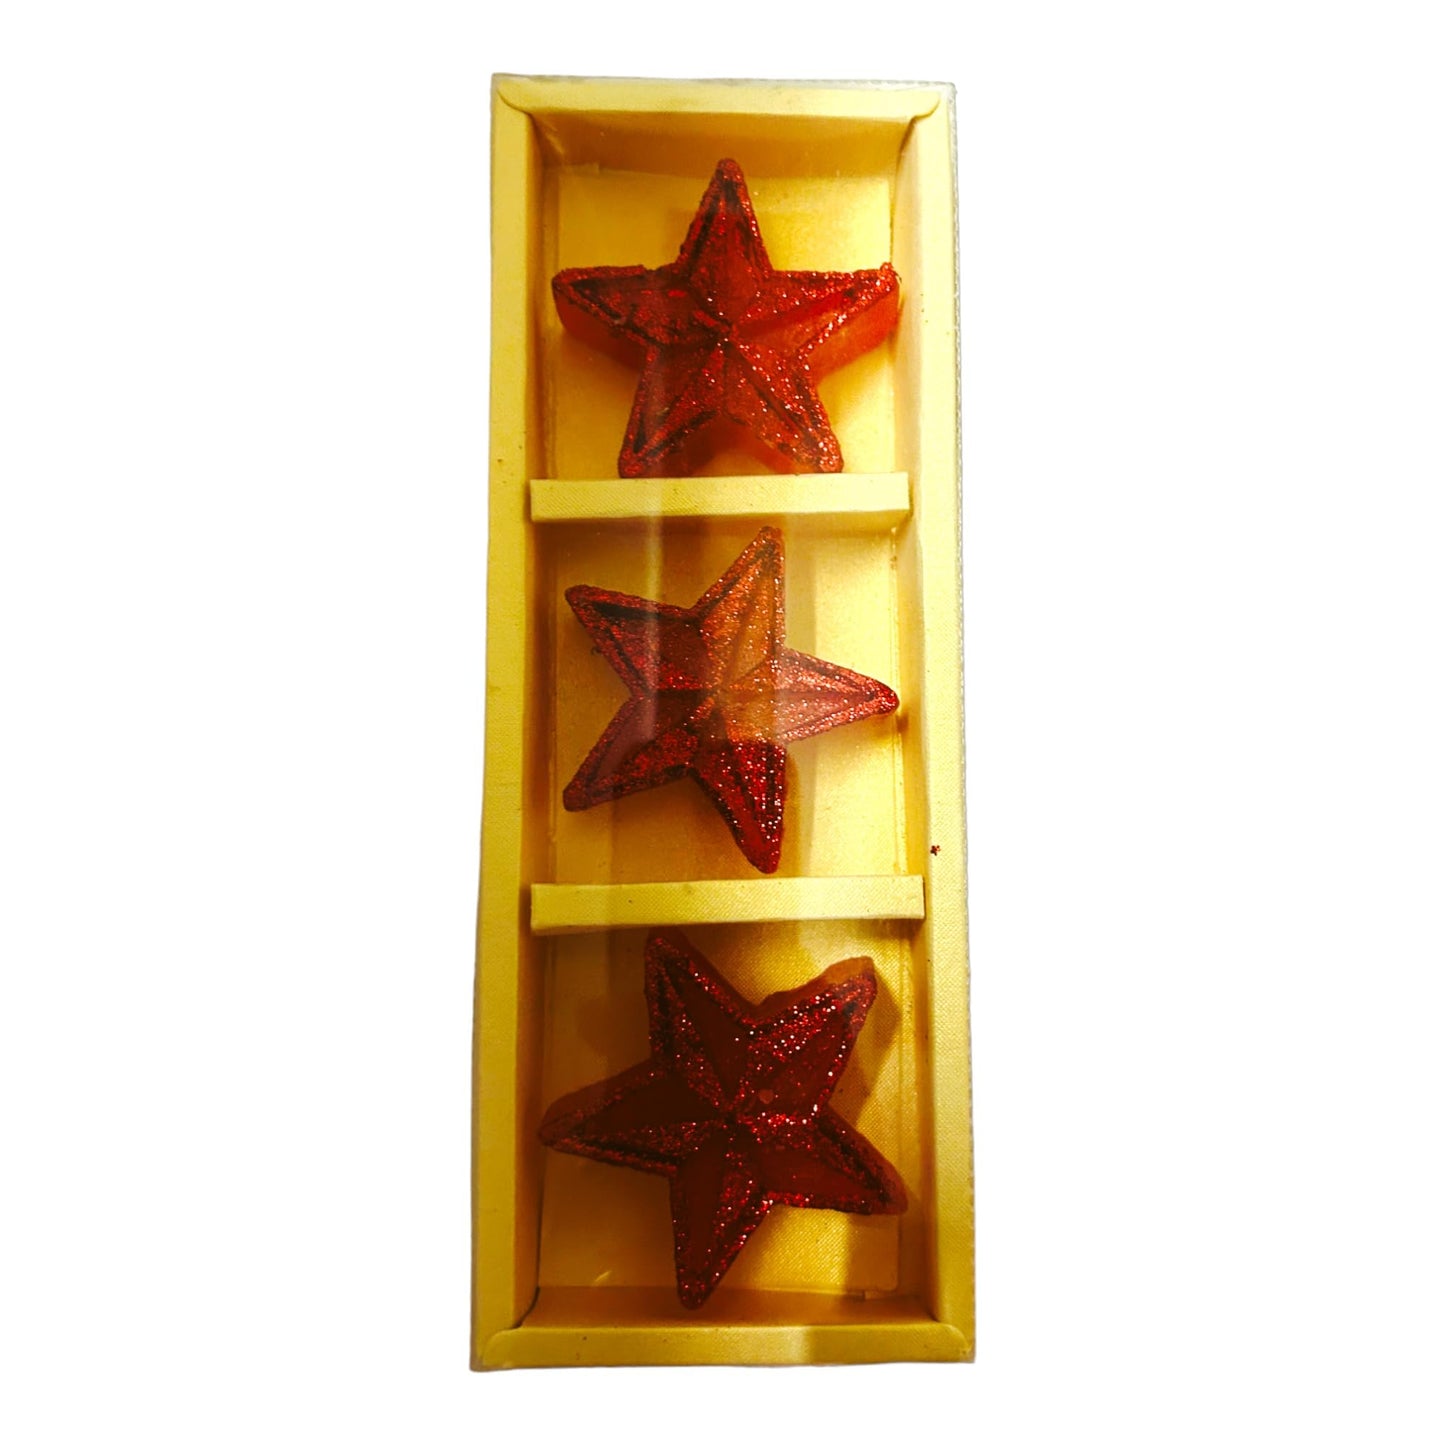 Pujahome Star Shape Candle for Decoration, Diwali Decoration for Home, Office Pack of 6 Candles(Red Color)